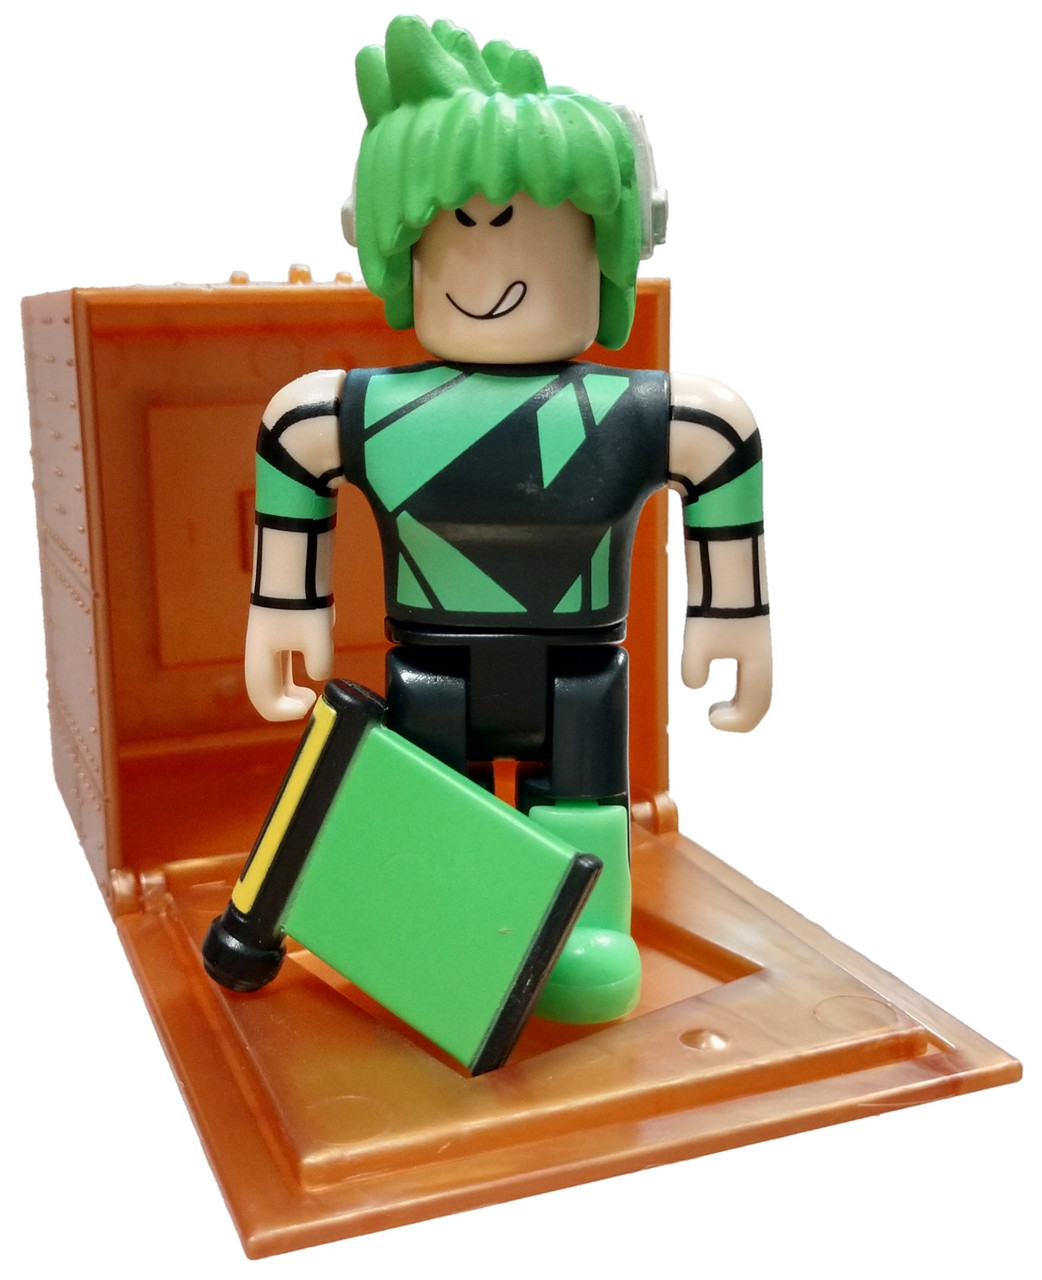 Roblox Series 8 Texting Simulator Future Tech Boy 3 Mini Figure With Cube And Online Code Loose Jazwares Toywiz - texting simulator codes roblox